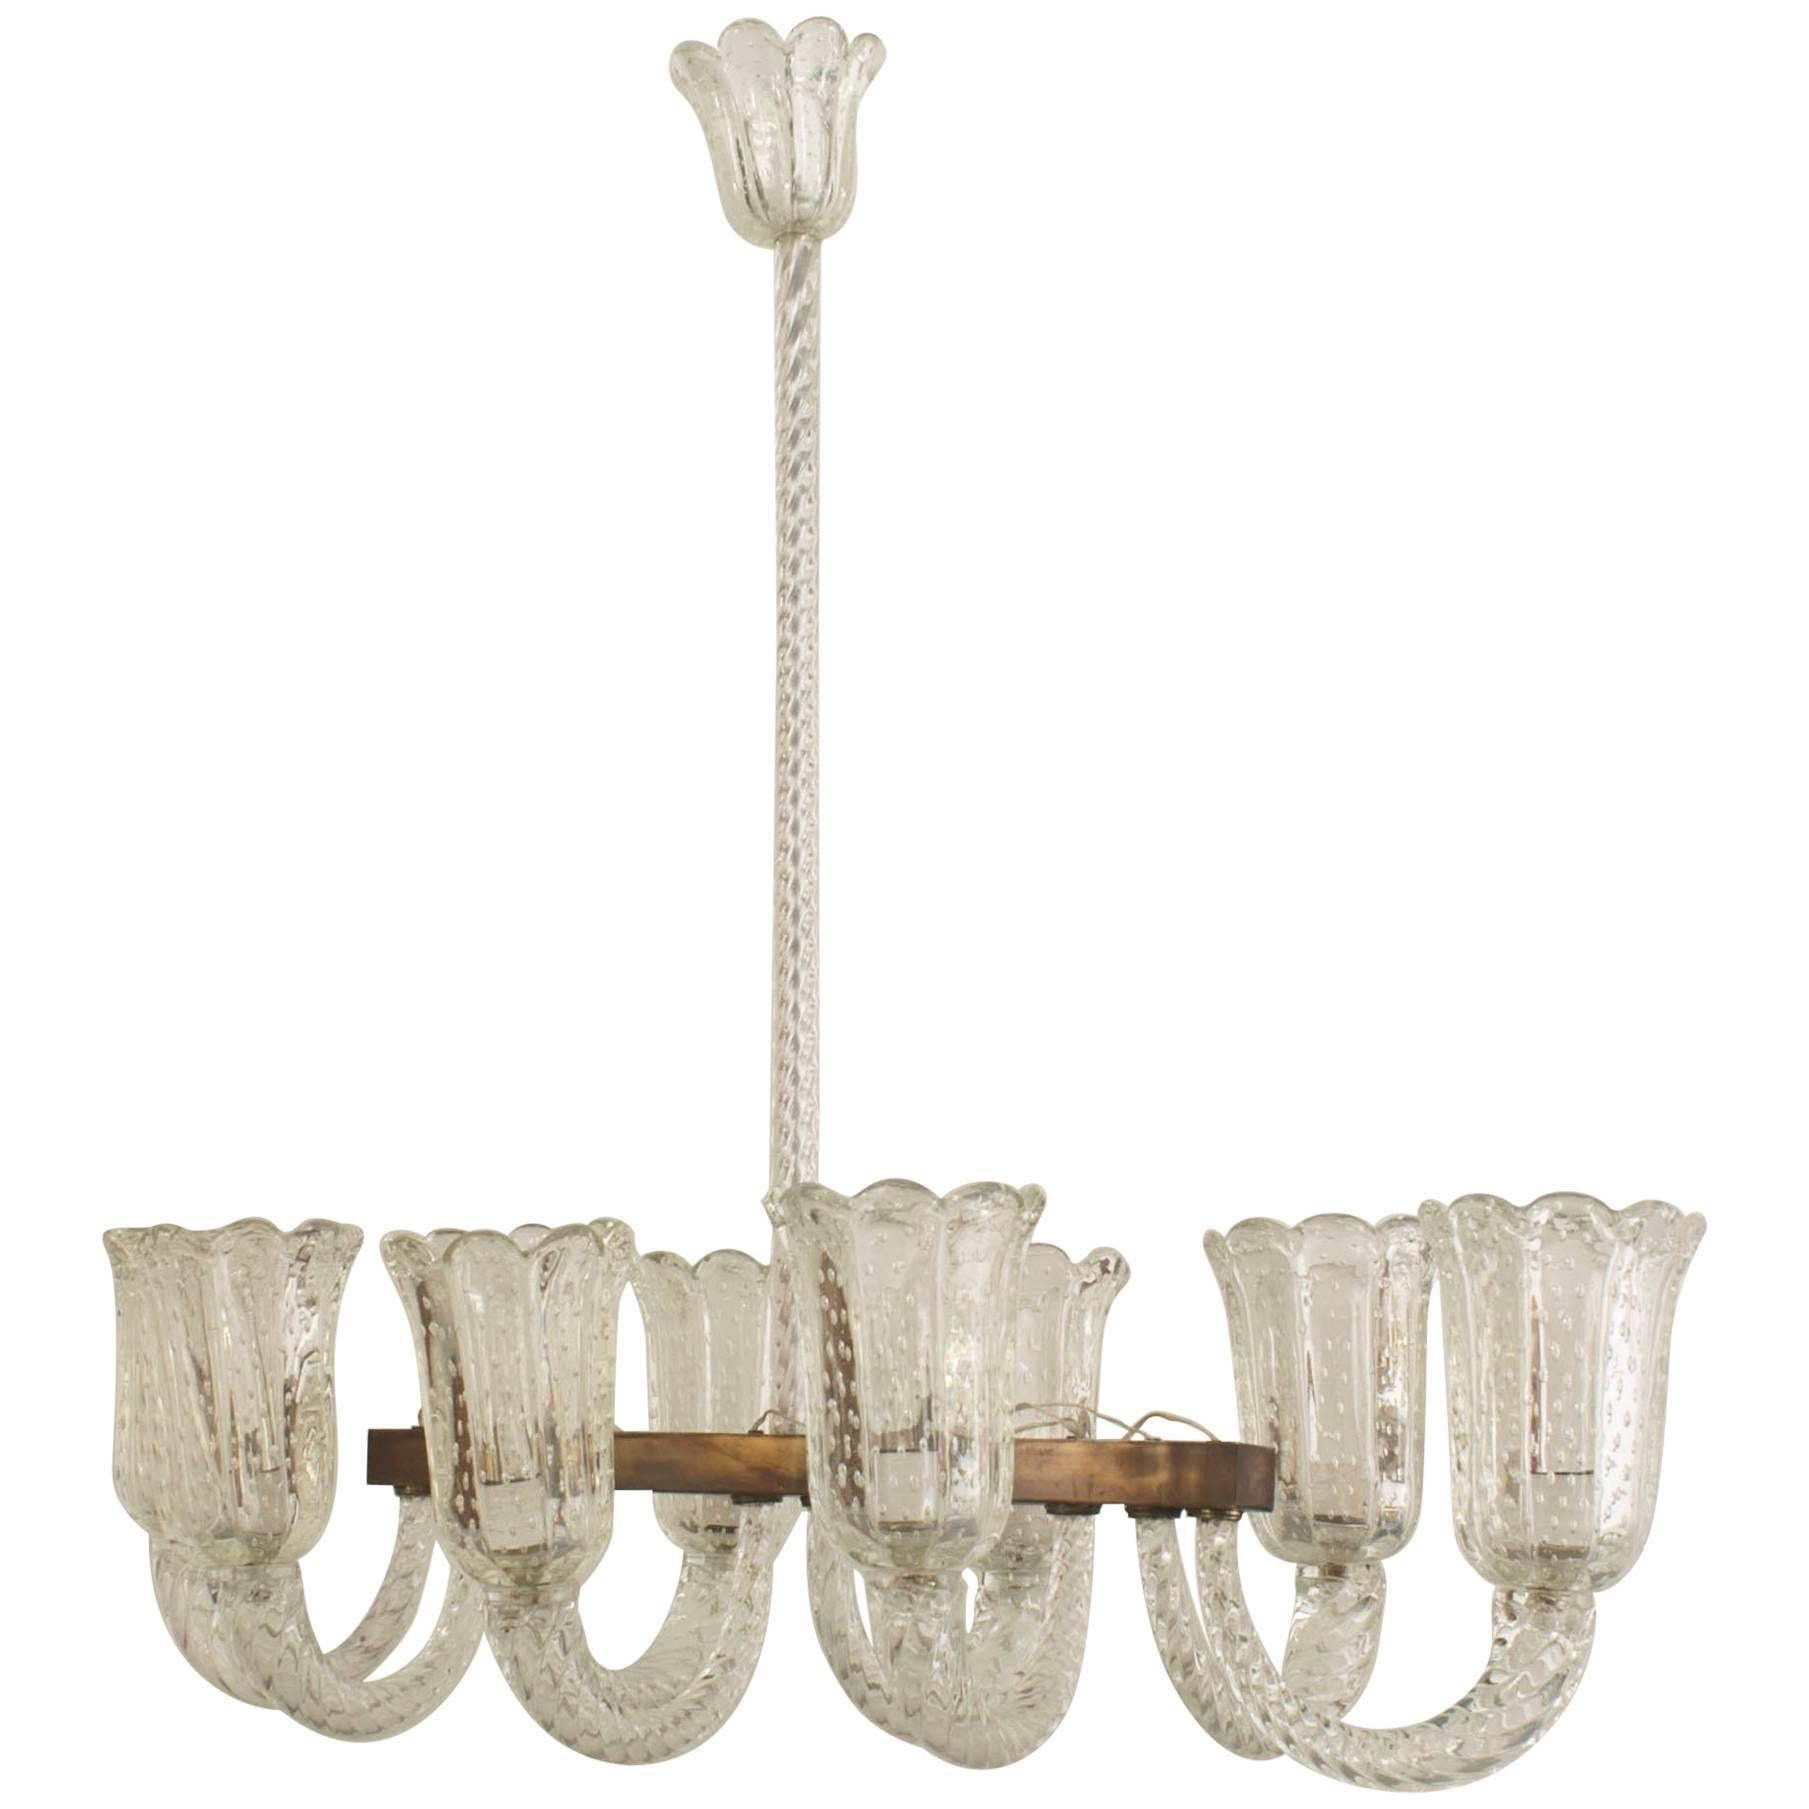 Barovier et Toso Italian Mid-Century Bubble Glass Fluted Chandelier